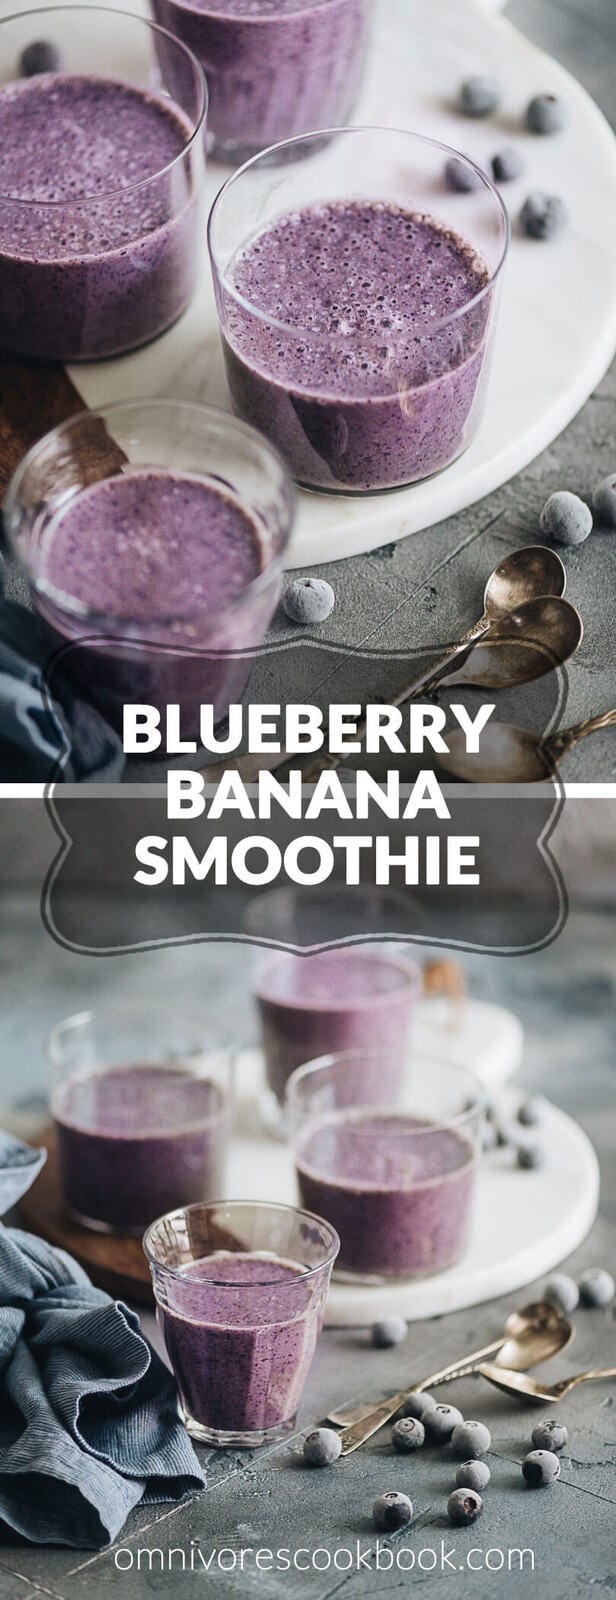 Blueberry Banana Smoothie - this easy drink is not only delicious and creamy, but also contains lean protein that helps you recover and build muscle after a workout. {Gluten-Free, Vegetarian Adaptable}